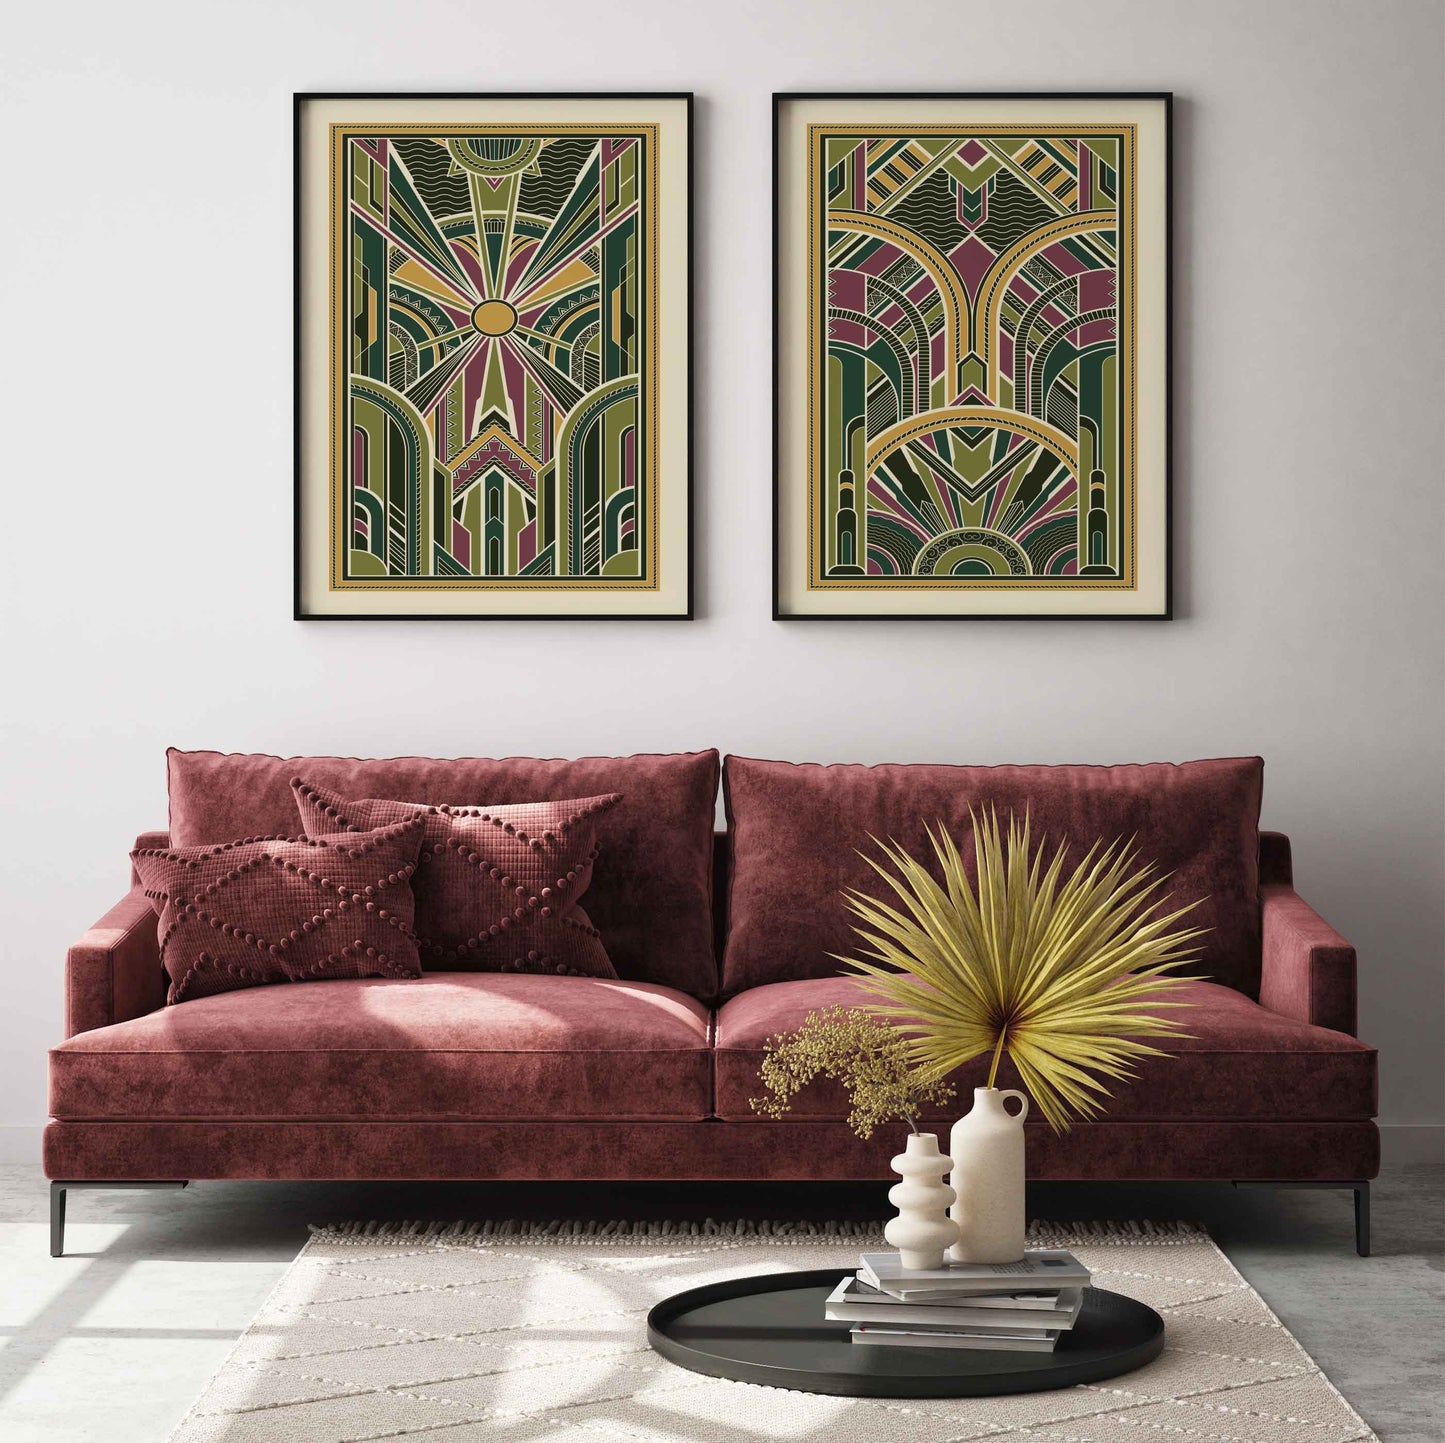 Set of Art Deco Prints with geometric pattern in Green